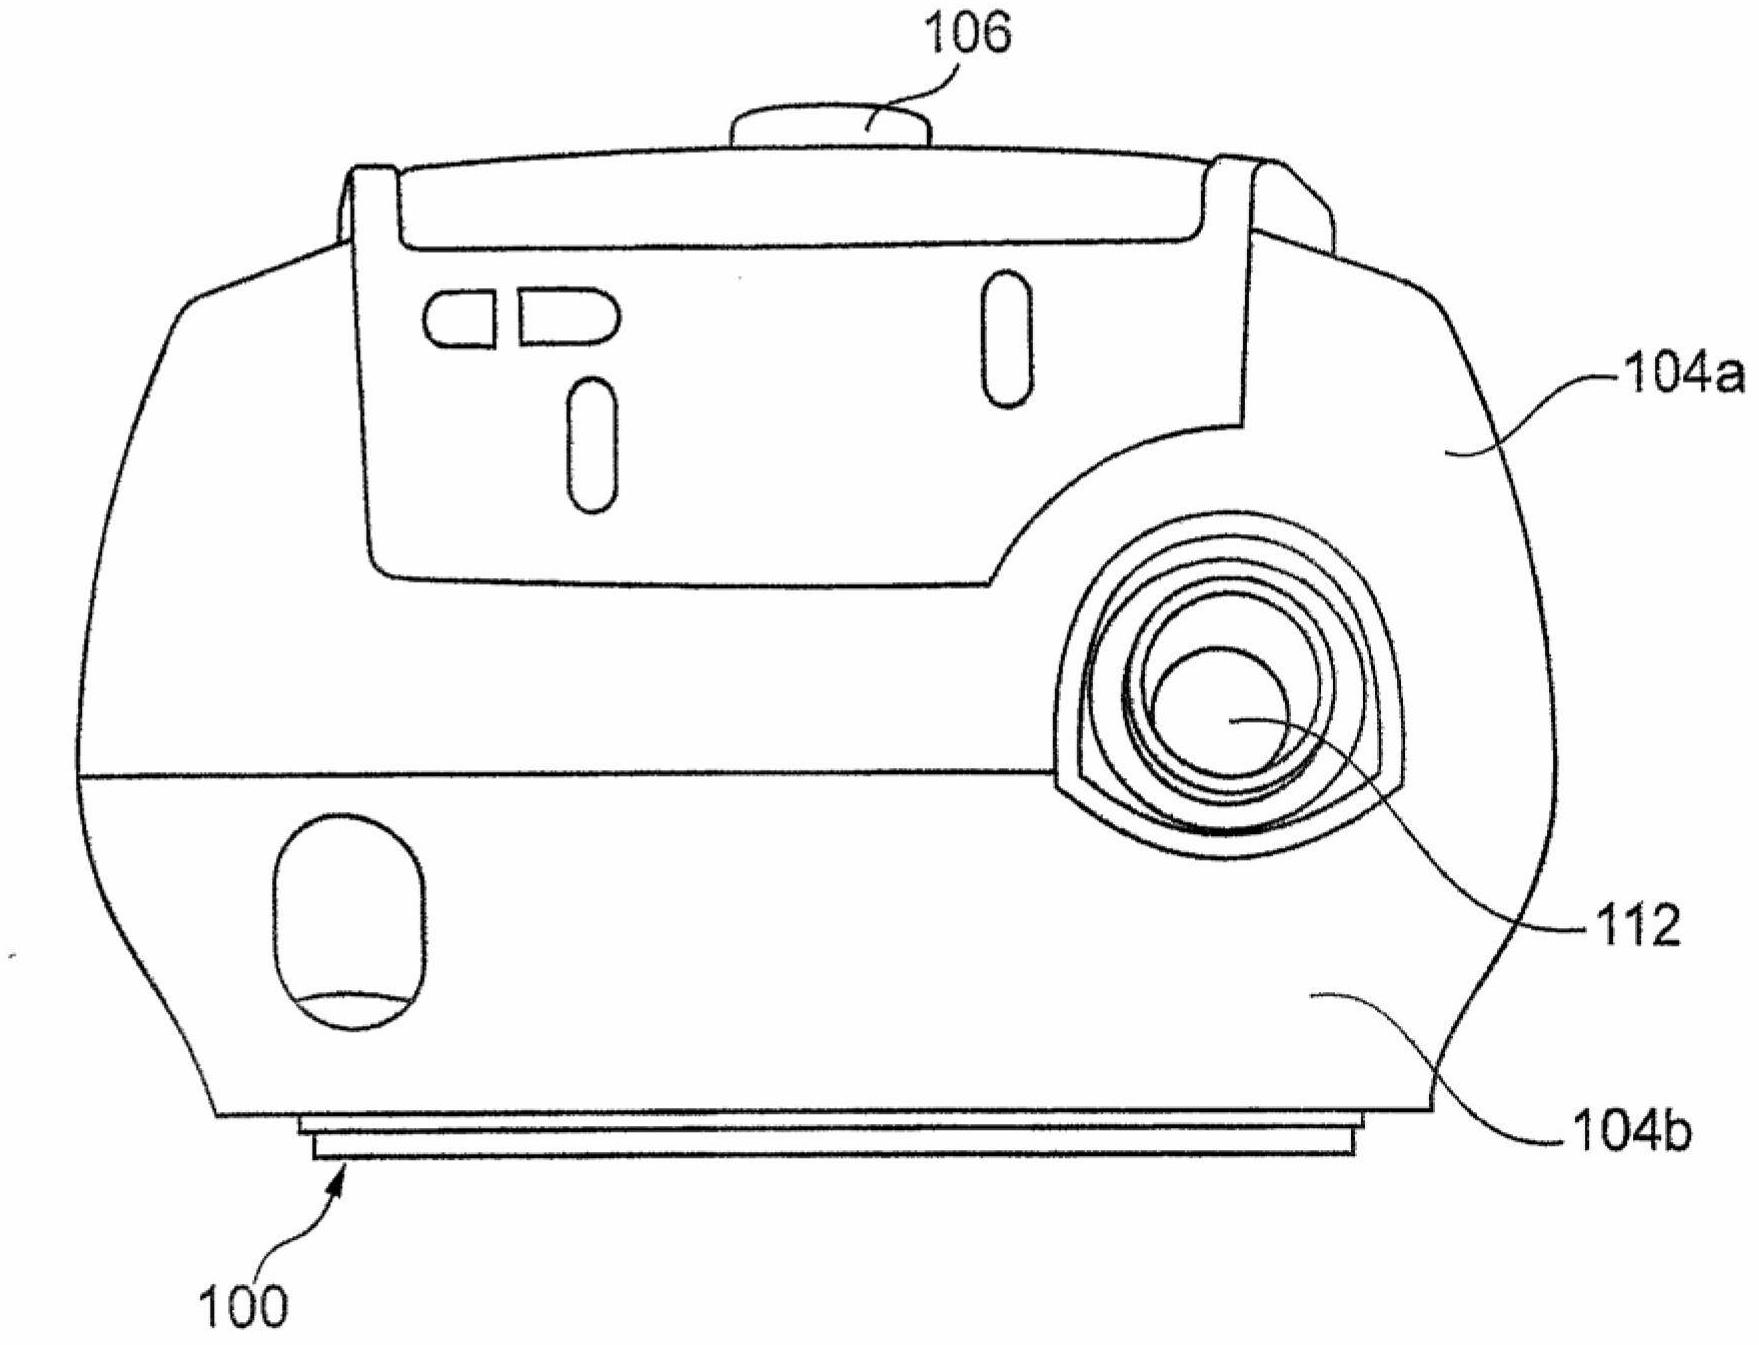 Patient ventilation device and components thereof